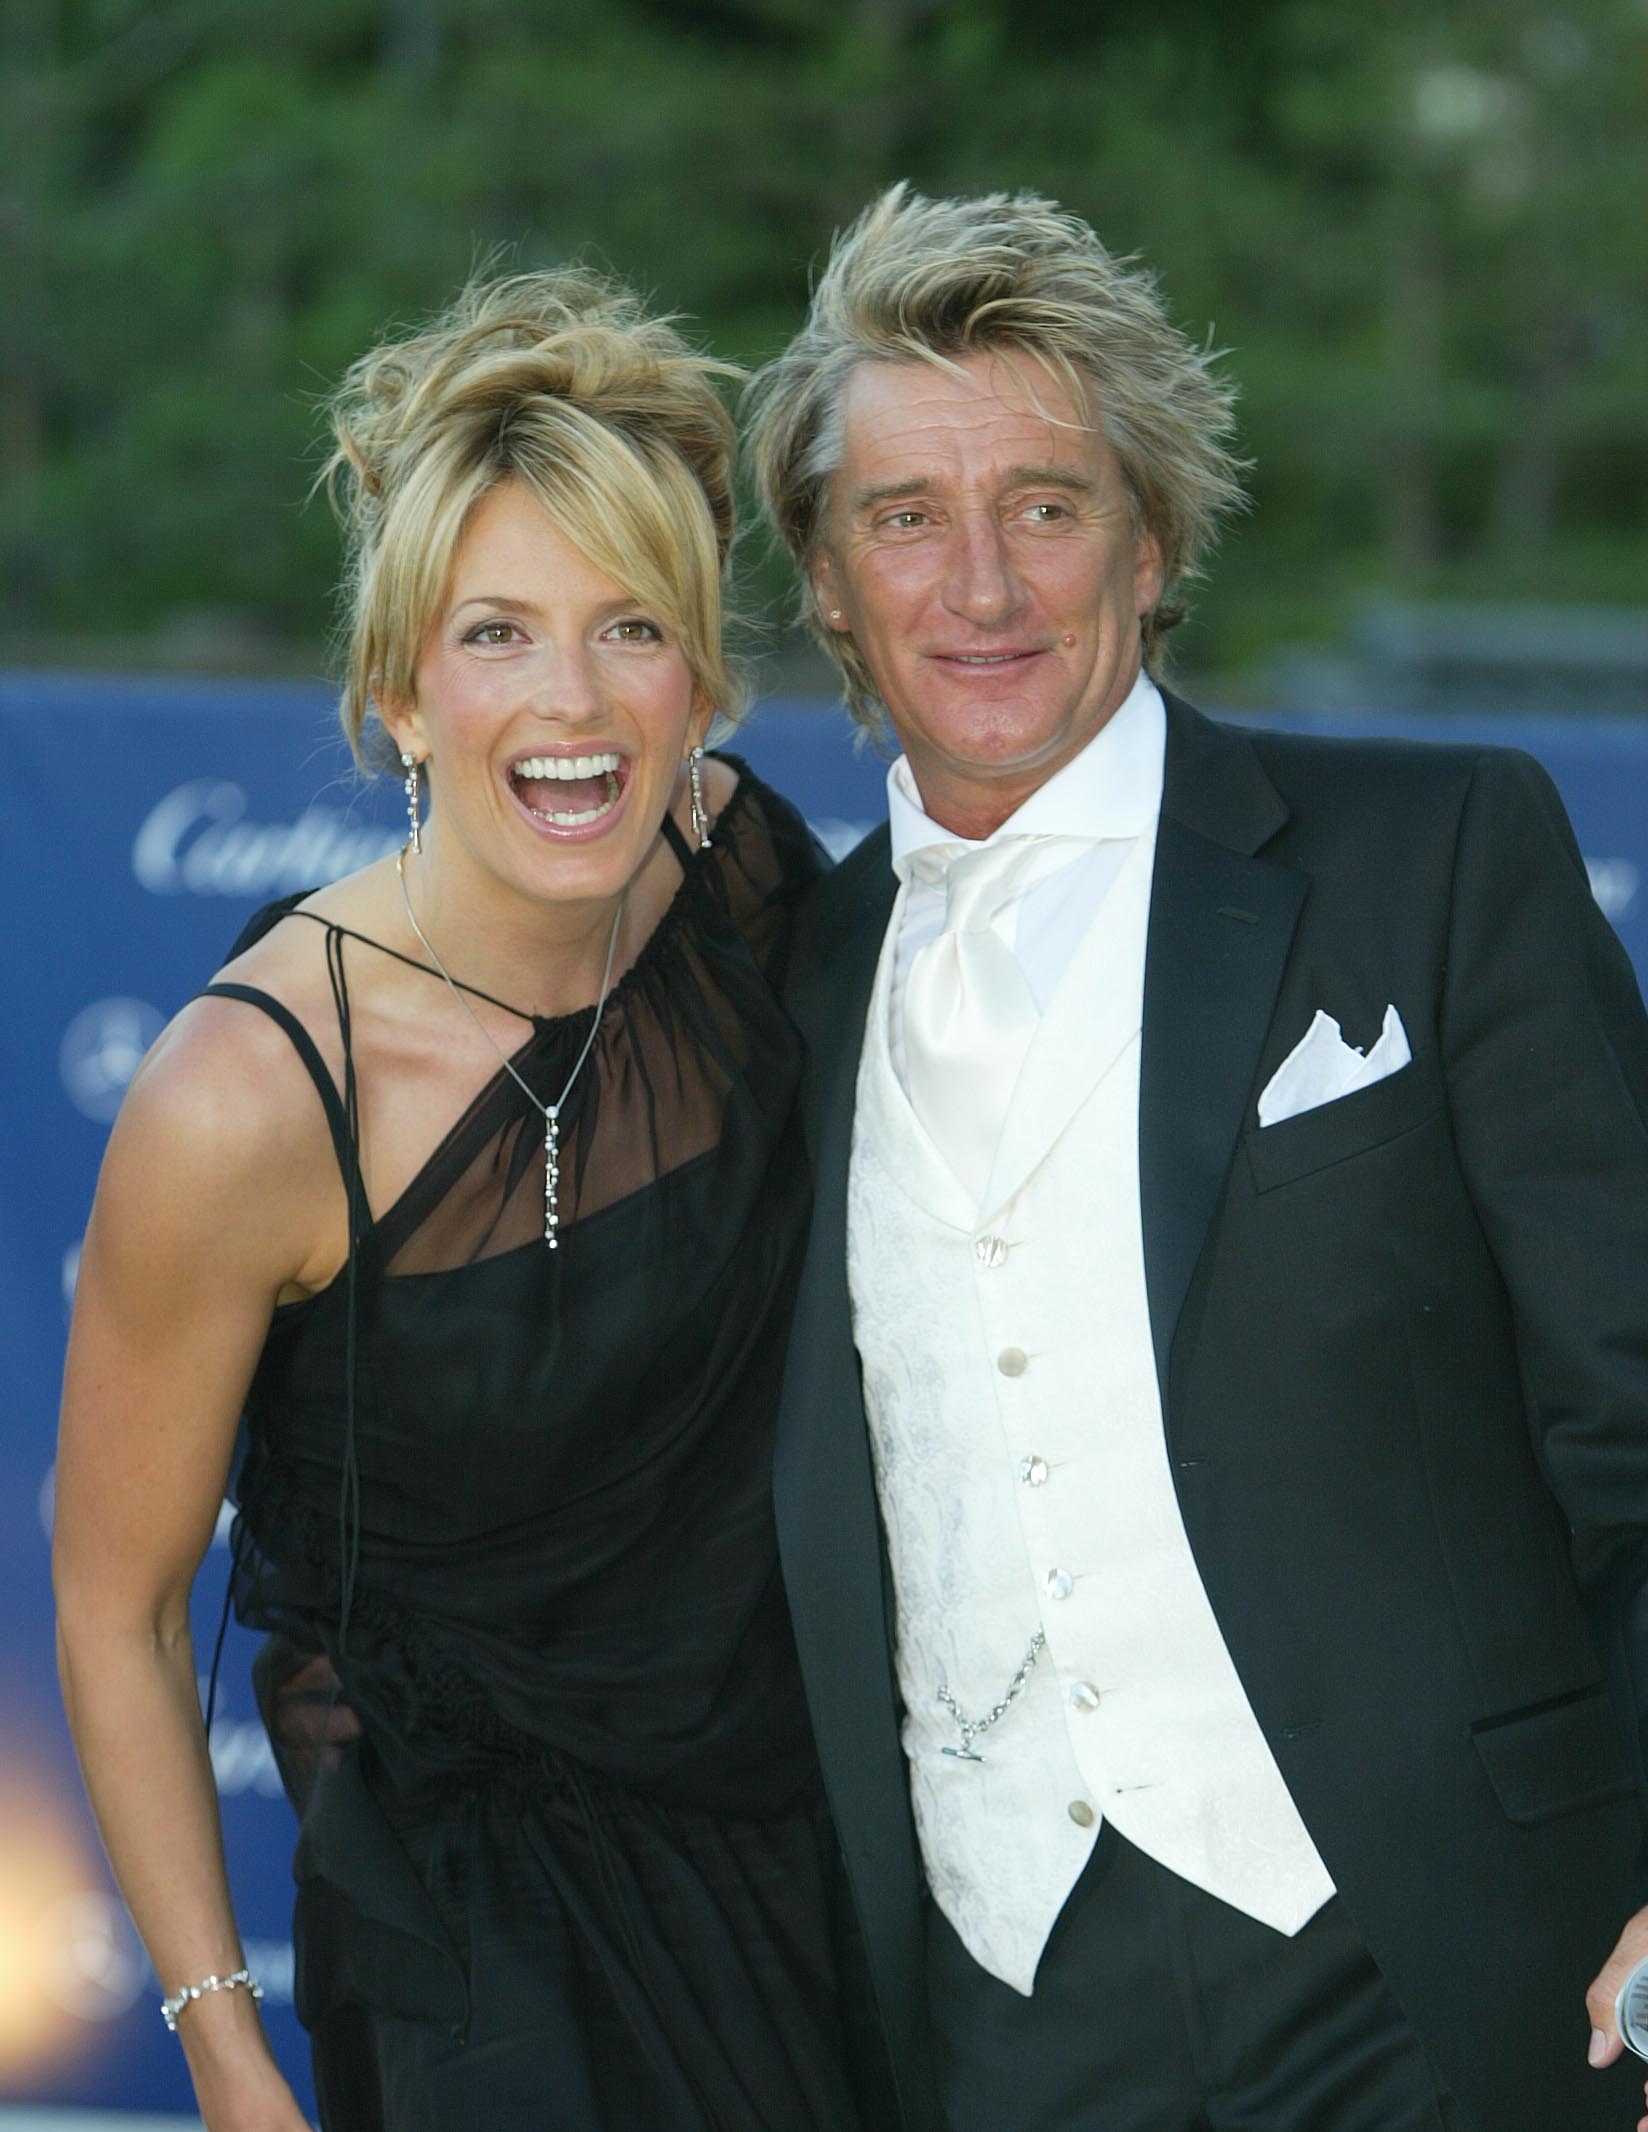 Penny Lancaster with Rod Stewart in Monaco in 2003 | Source: Getty Images